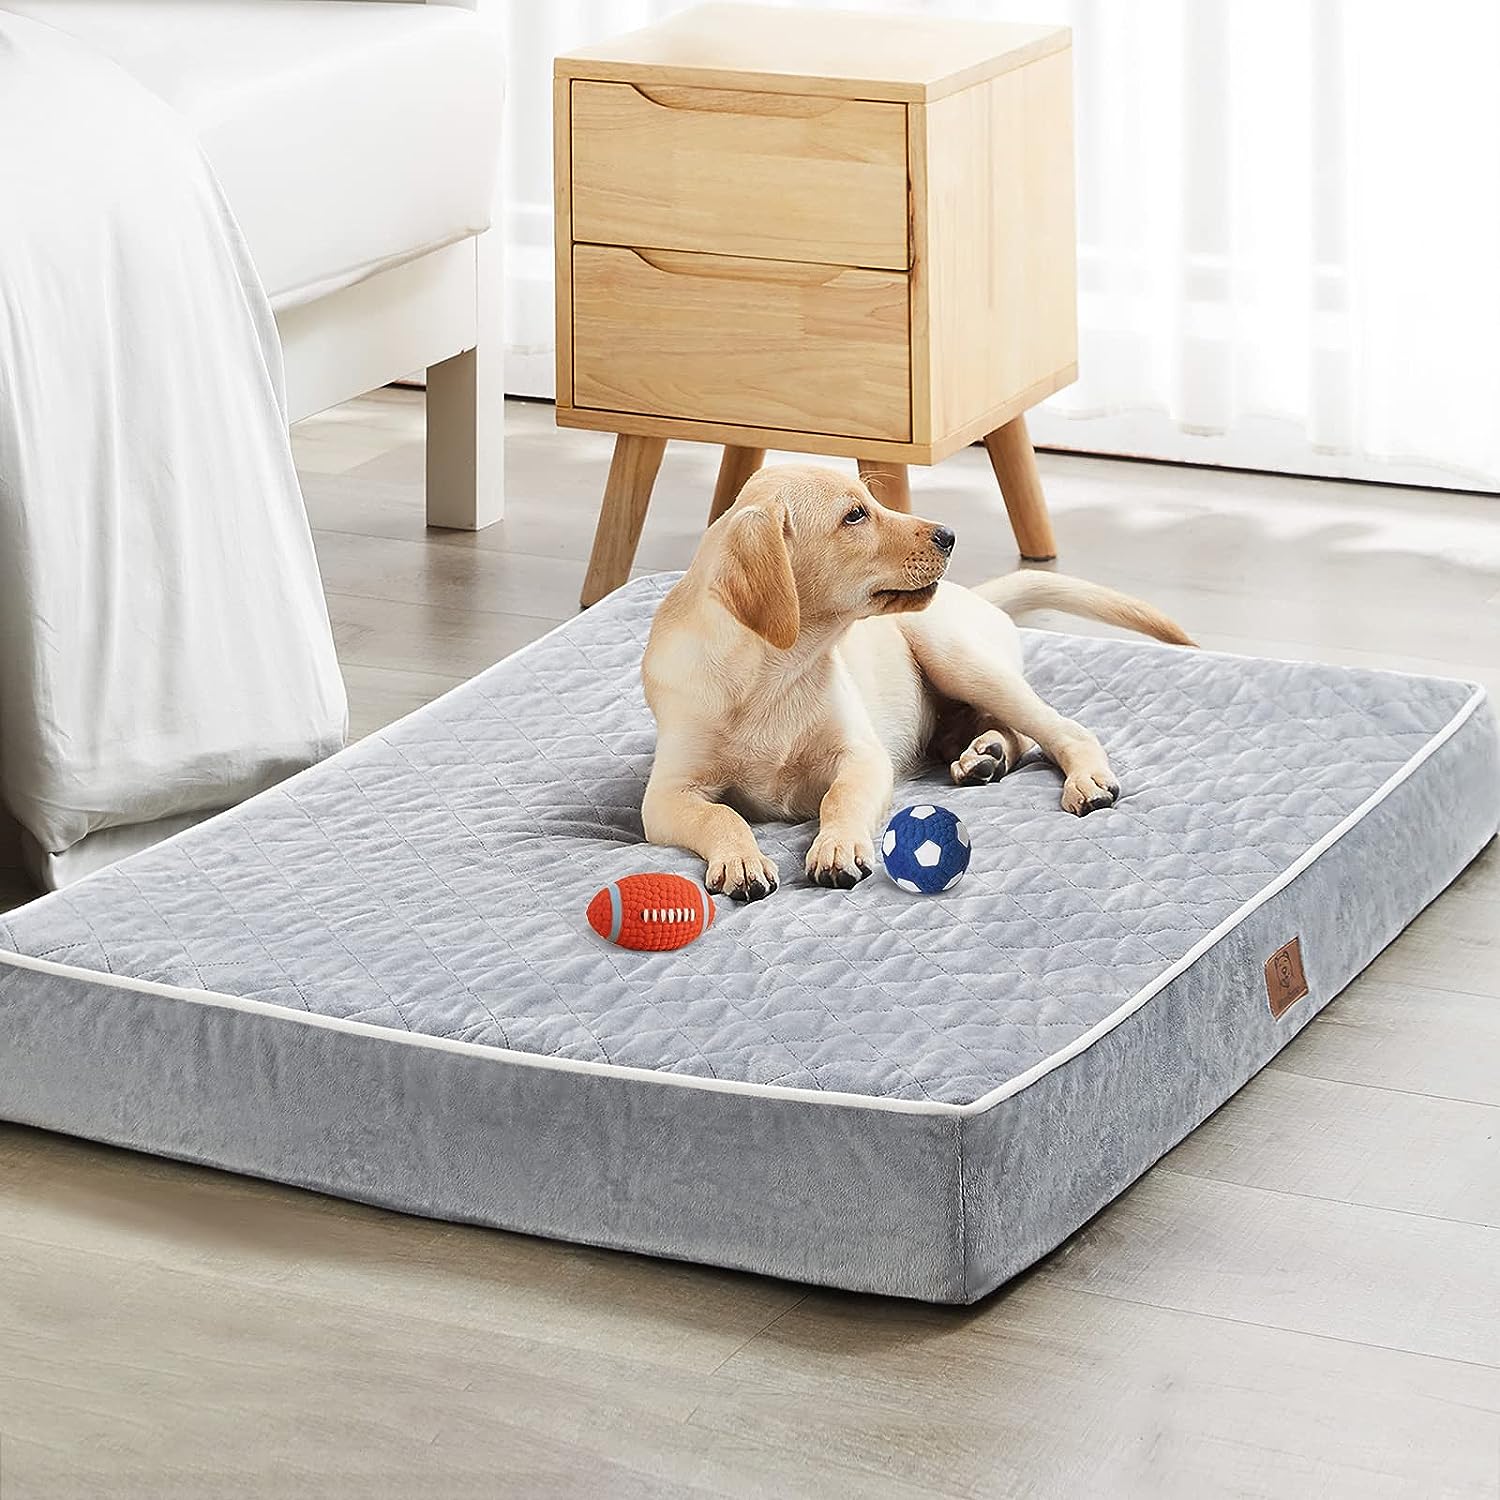 WNPETHOME Orthopedic Beds for Large Dogs with Removable Washable Cover Anti-Slip Bottom, Extra Large Waterproof Egg Crate Foam Pet Bed Mat, Multi-Needle Quilting XL Crate Bed